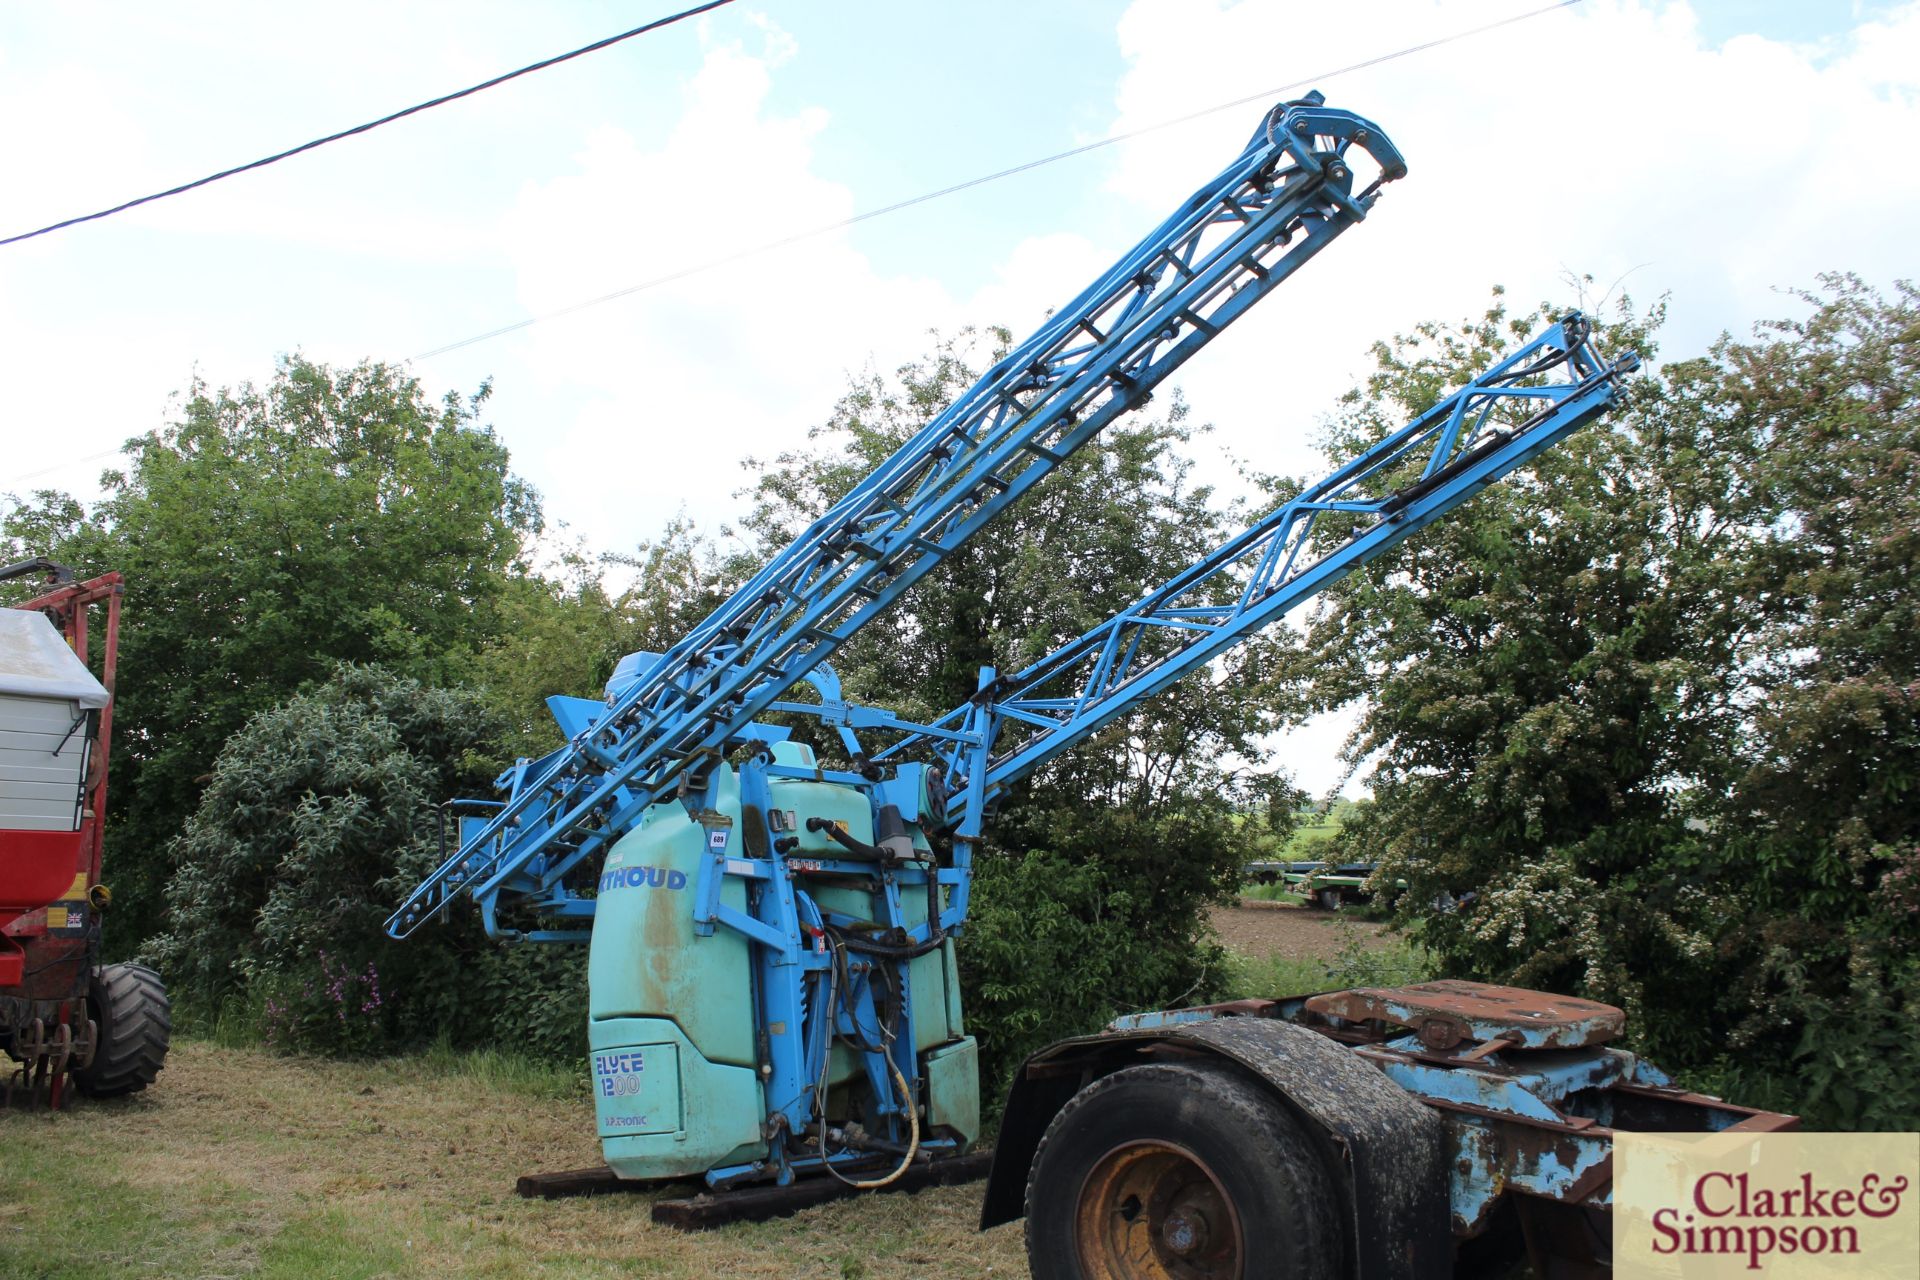 Berthoud Elyte DP-Tronic 1,200L 24m mounted sprayer. Model ELIVE12AX24. 10/2006. Serial number